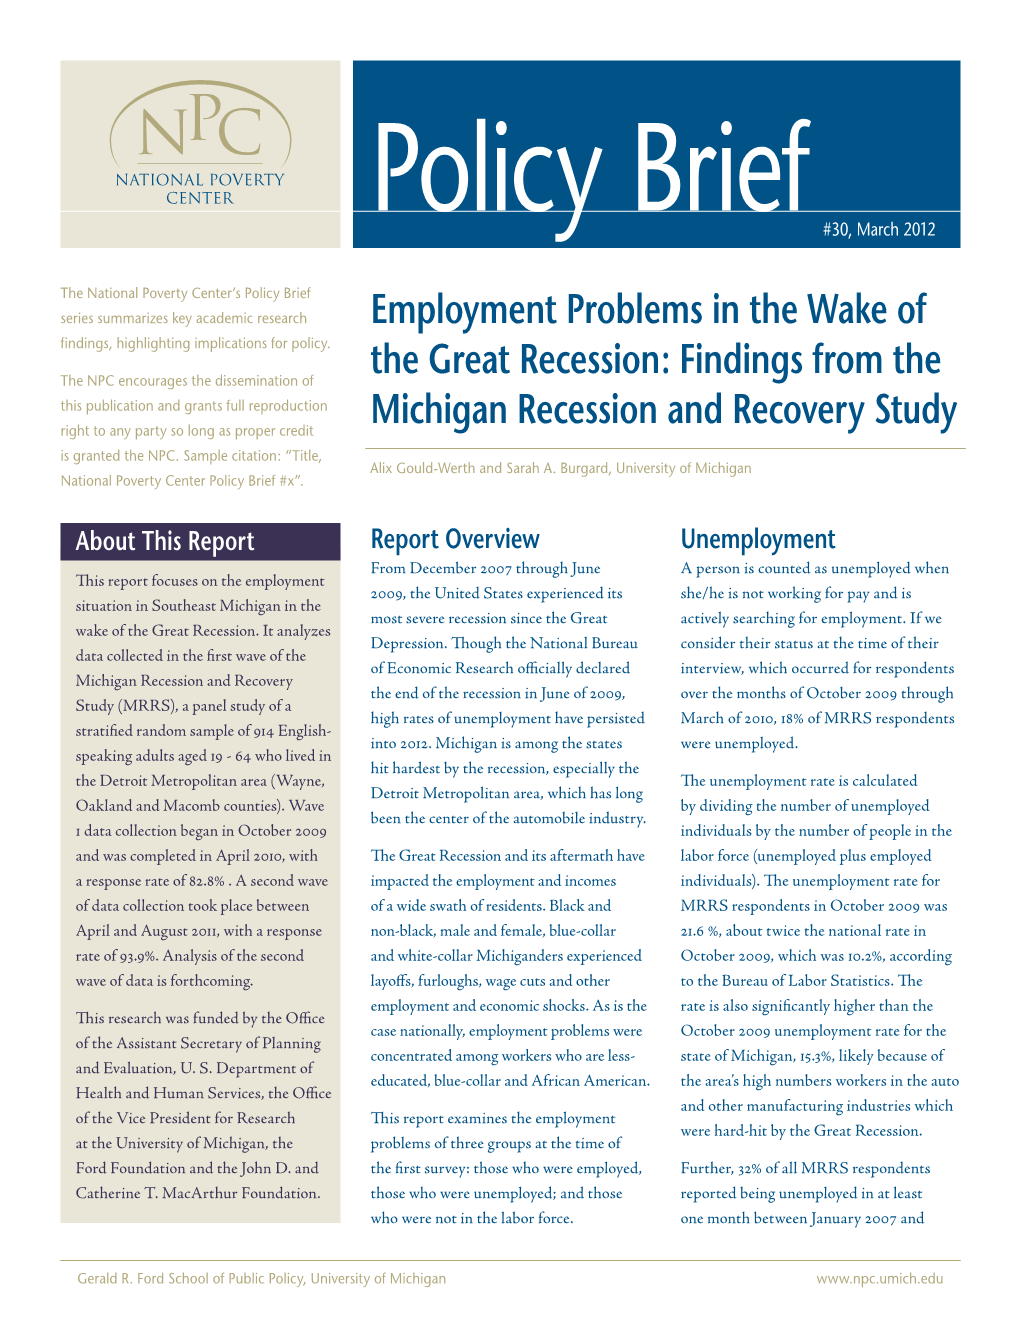 Employment Problems in the Wake of the Great Recession: Findings From